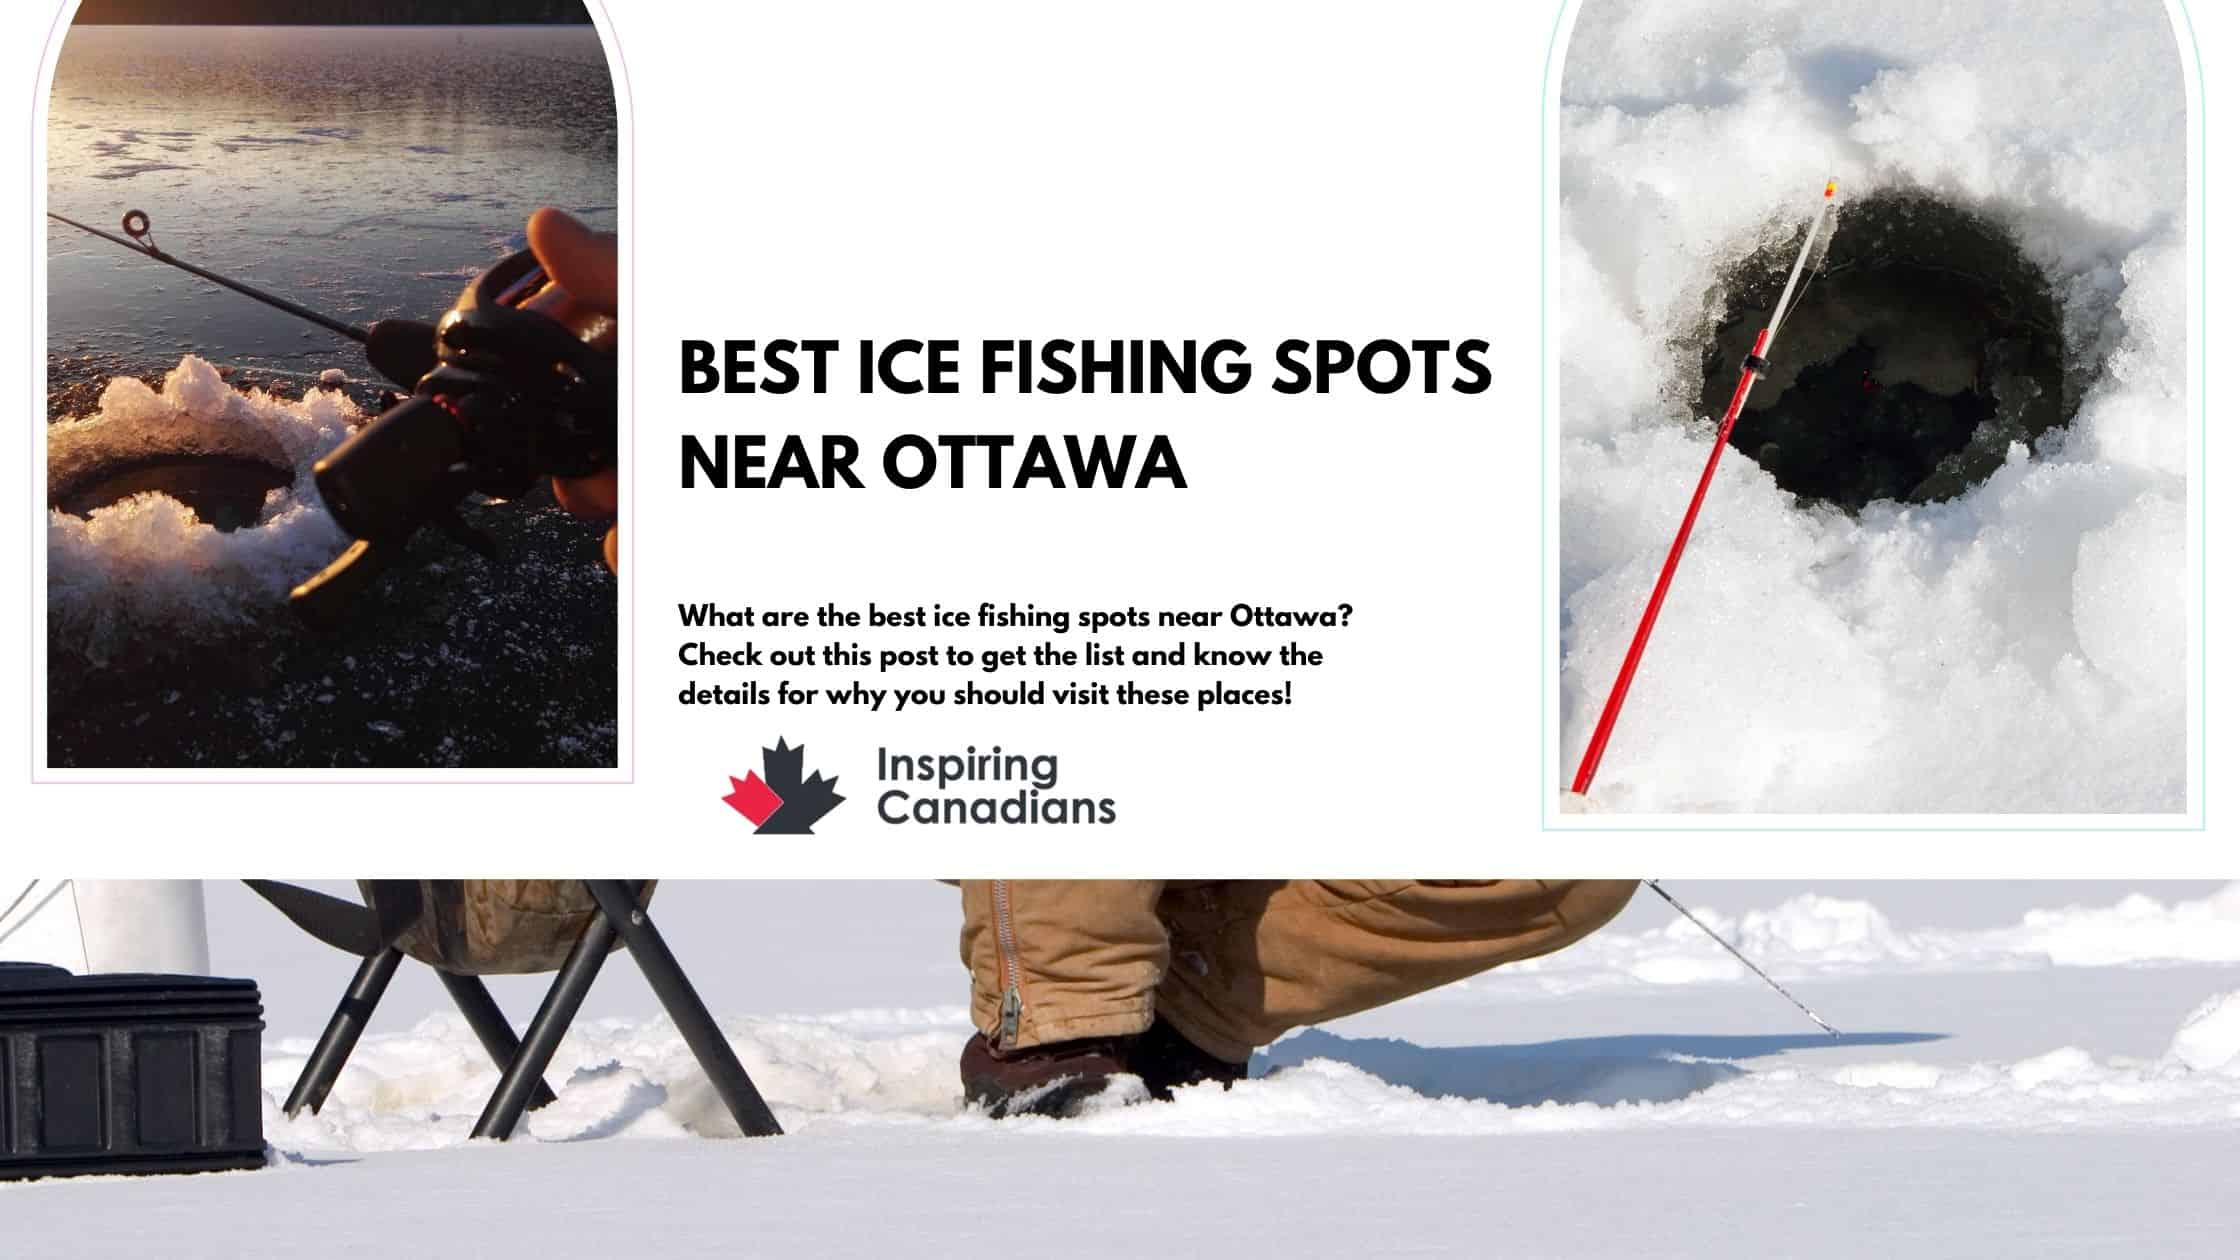 What are the best ice fishing spots near Ottawa? Check out this post to get the list and know the details for why you should visit these places!